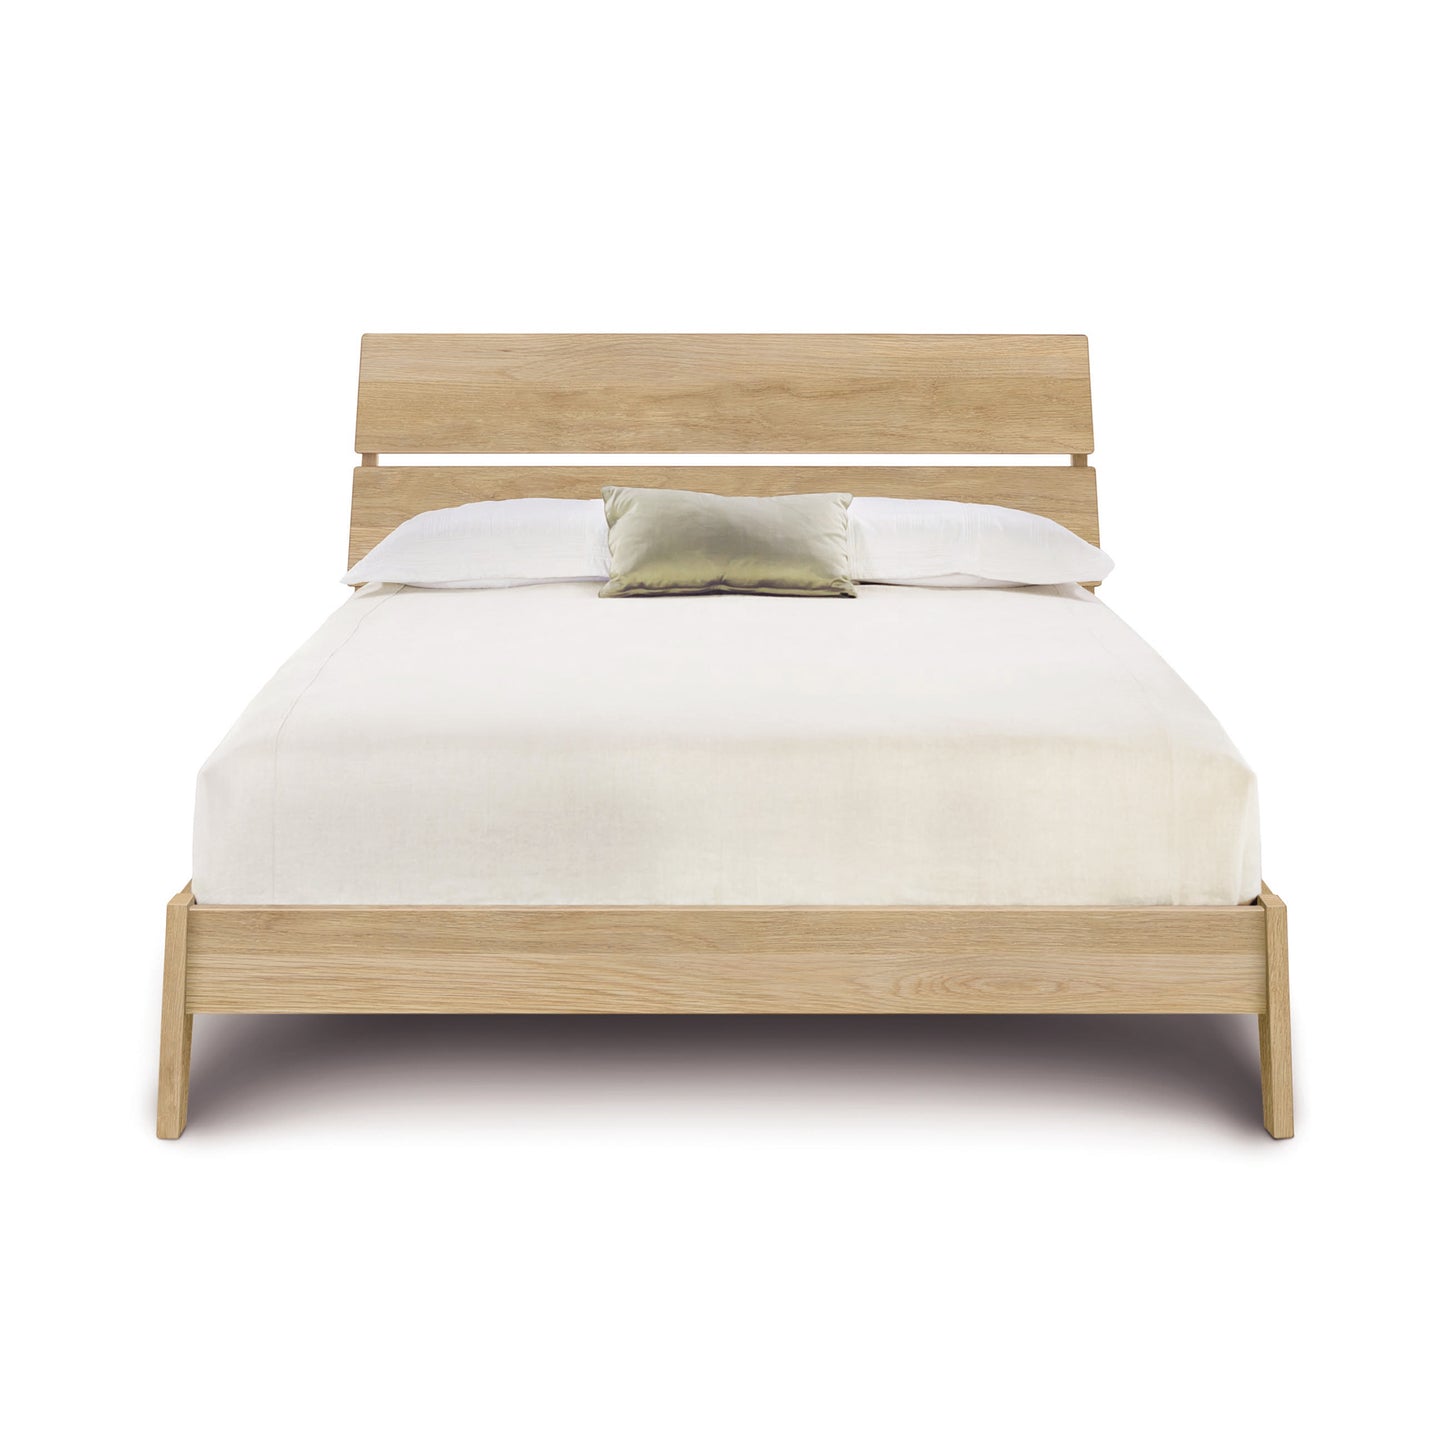 The Copeland Furniture Linn Oak Platform Bed is a durable and eco-friendly piece of sustainable furniture.